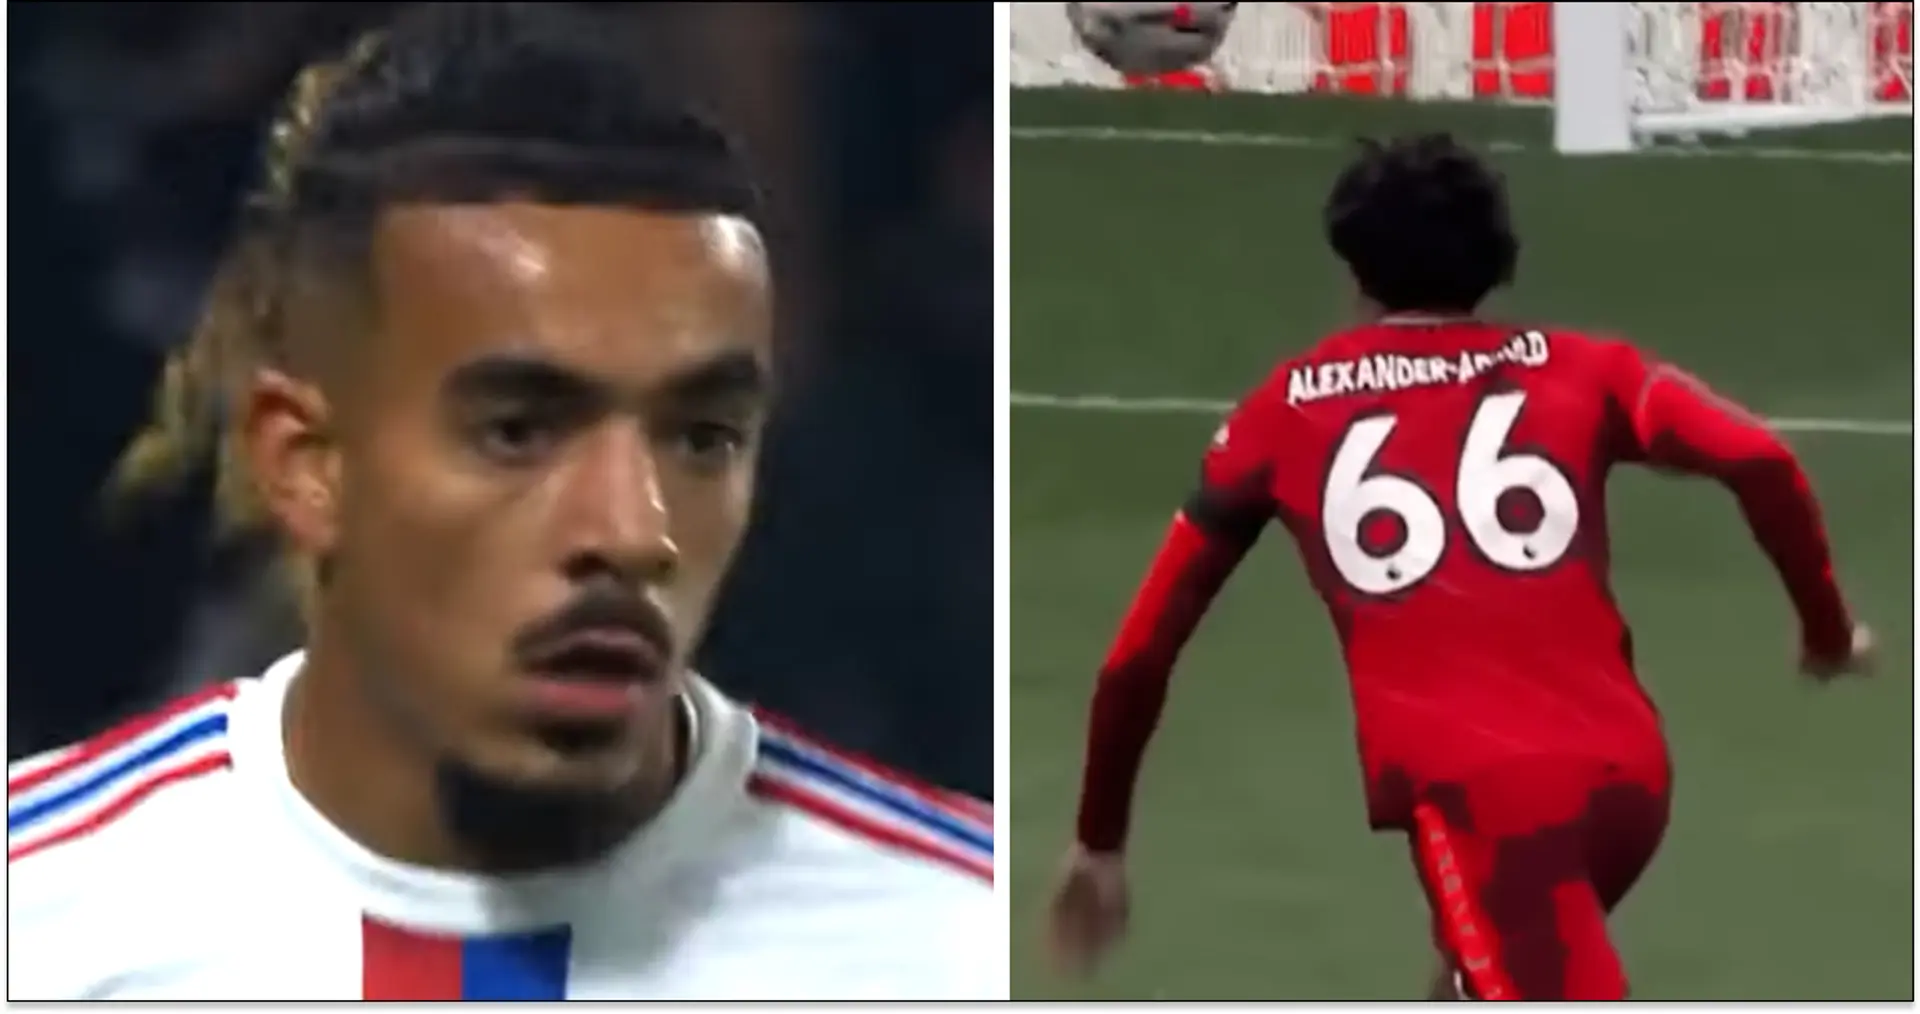 Chelsea 'monitoring' Lyon right-back compared to Alexander-Arnold